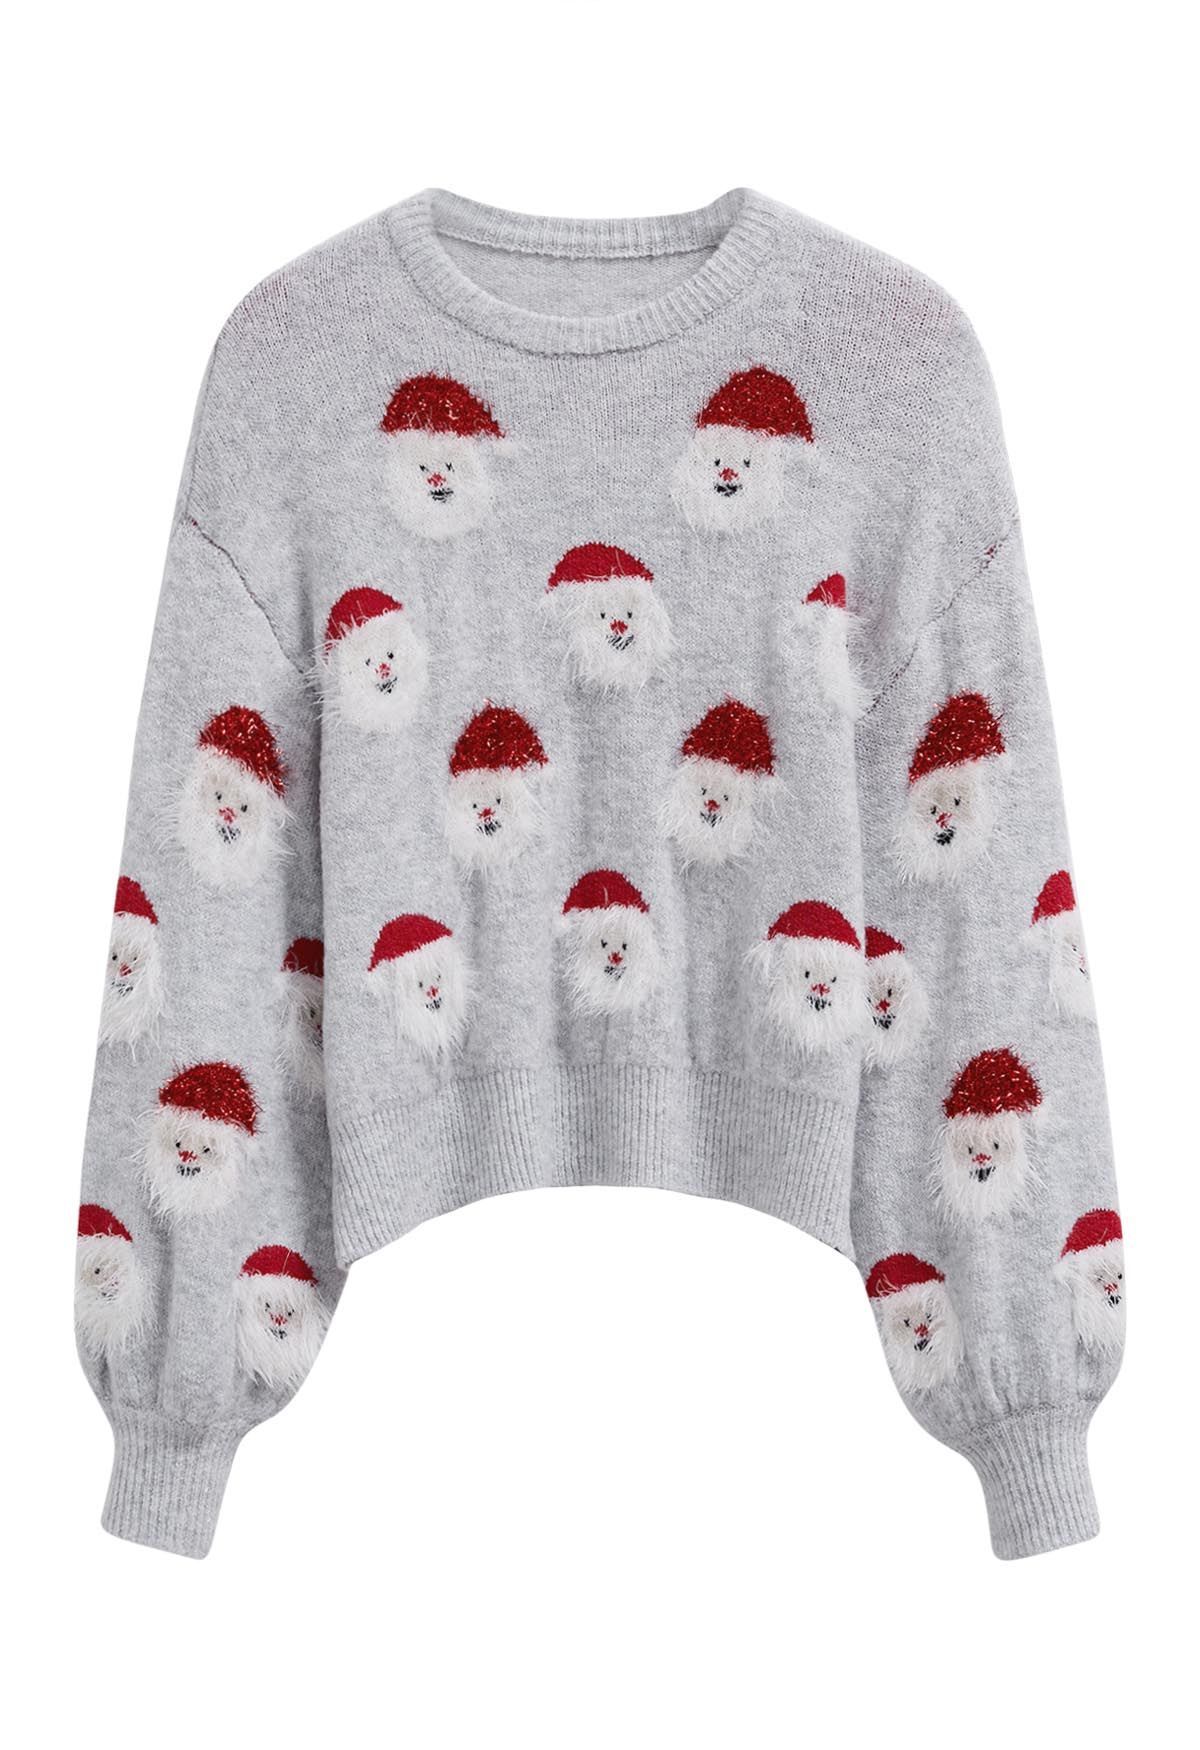 Fuzzy Santa Claus Knit Top in Grey | Chicwish